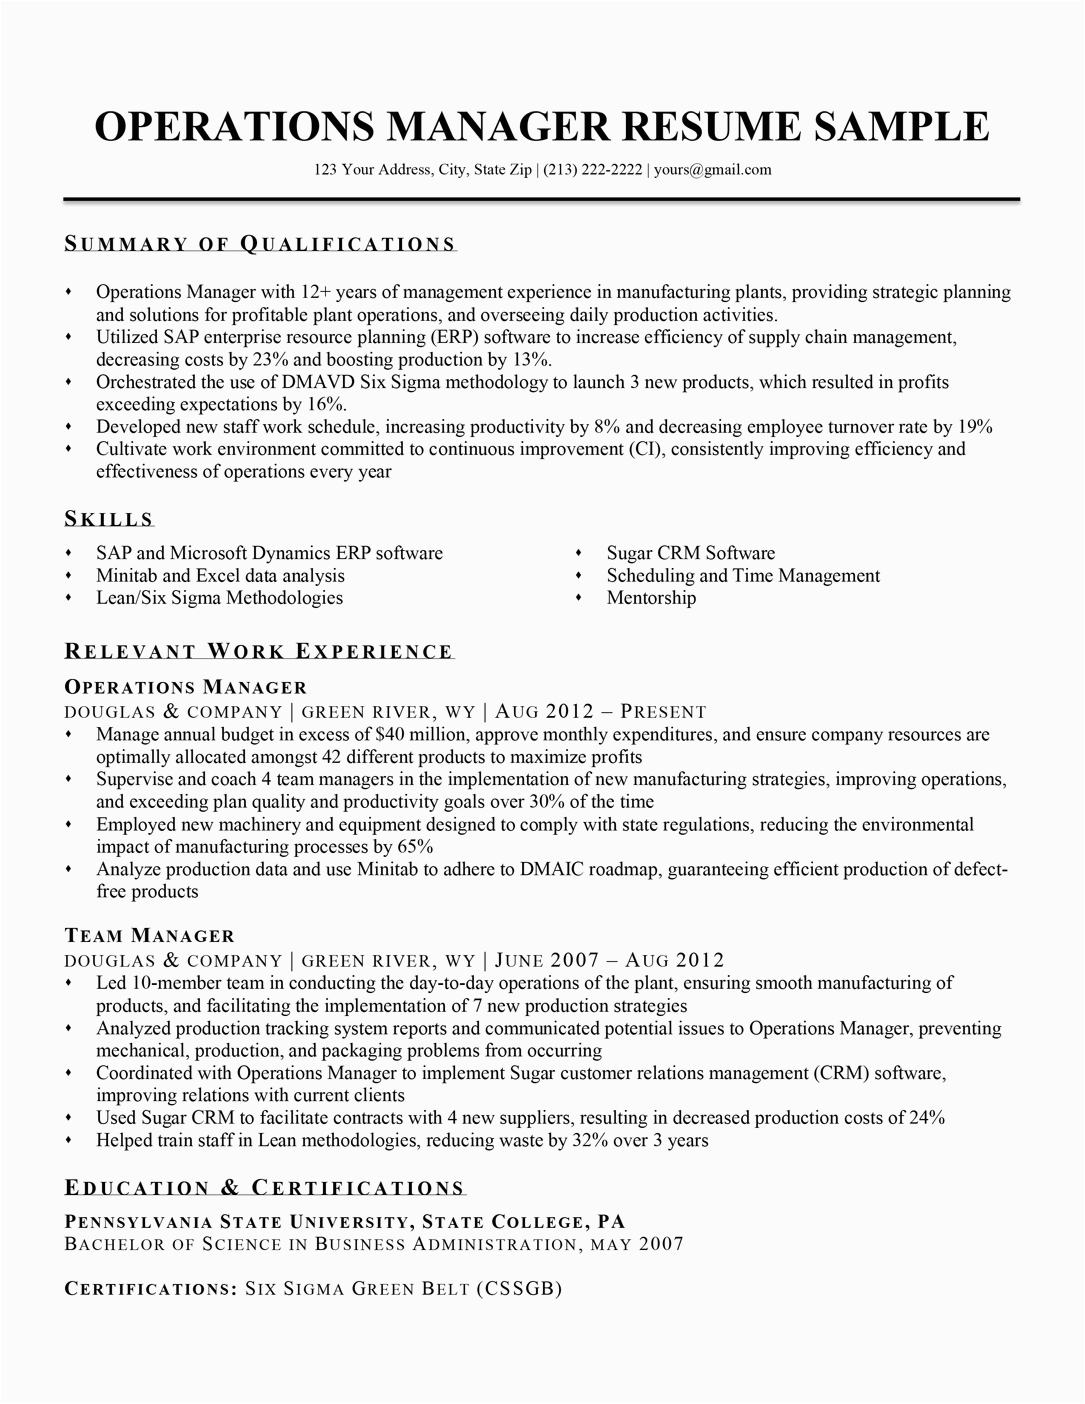 Resume Summary Sample for Operations Manager Operations Manager Resume Sample & Writing Tips